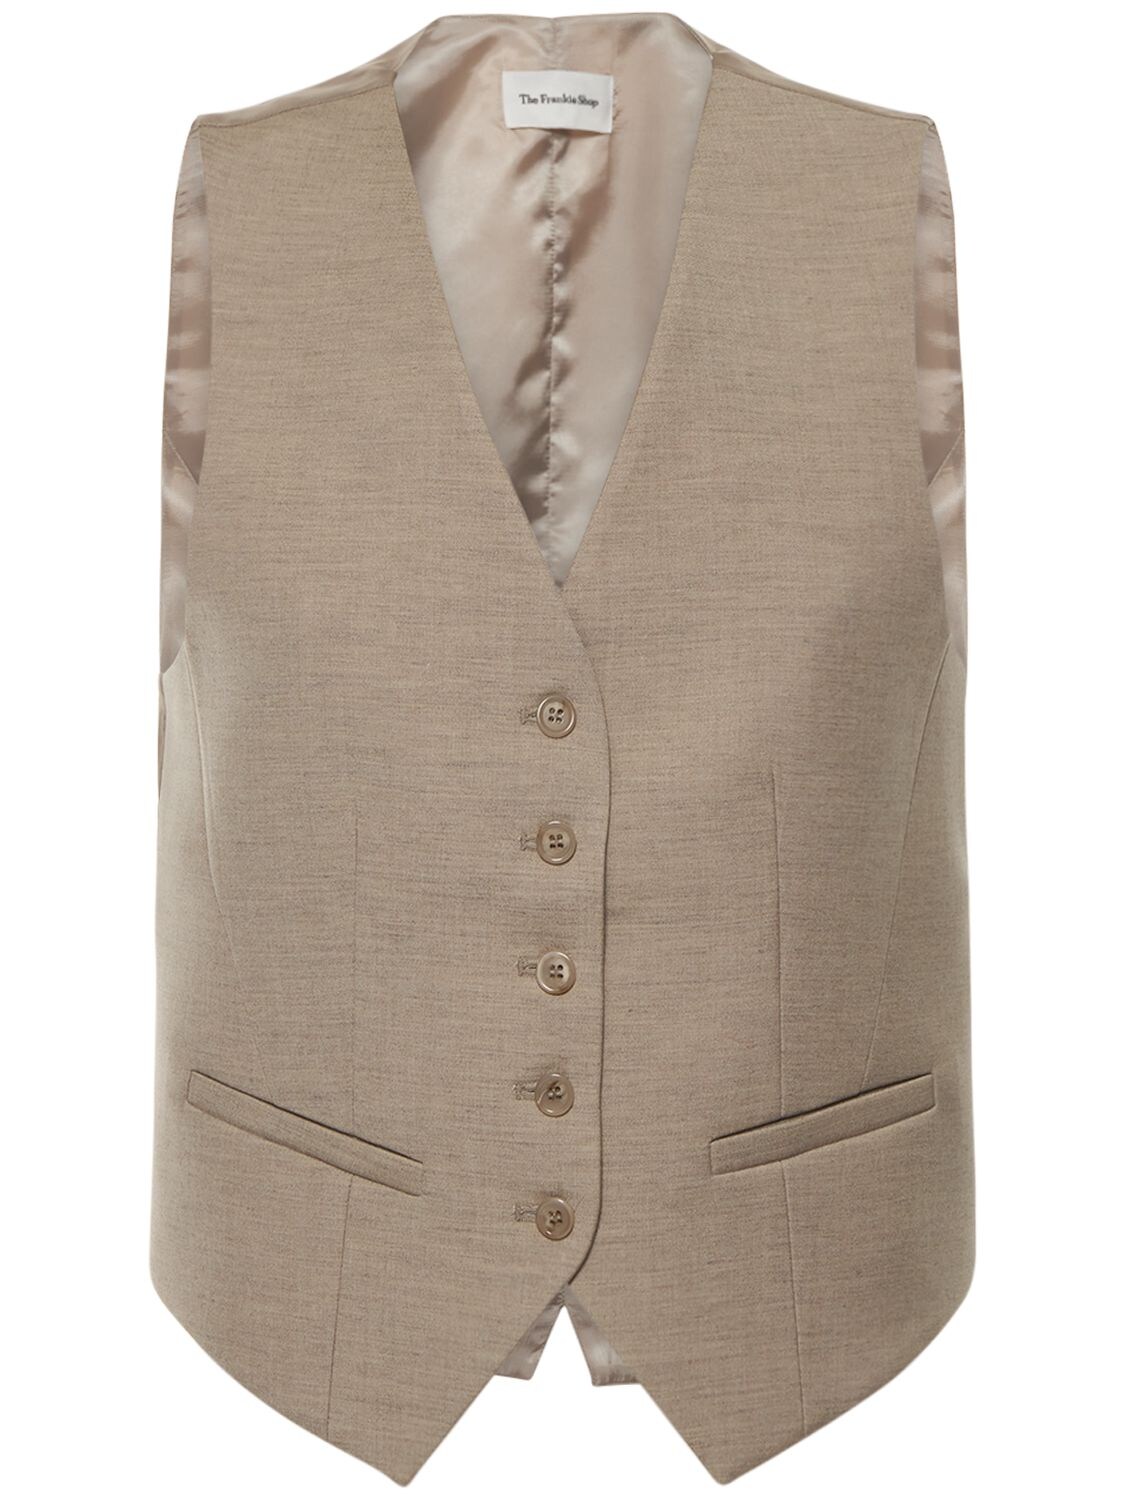 THE FRANKIE SHOP GELSO LYOCELL BLEND WAISTCOAT